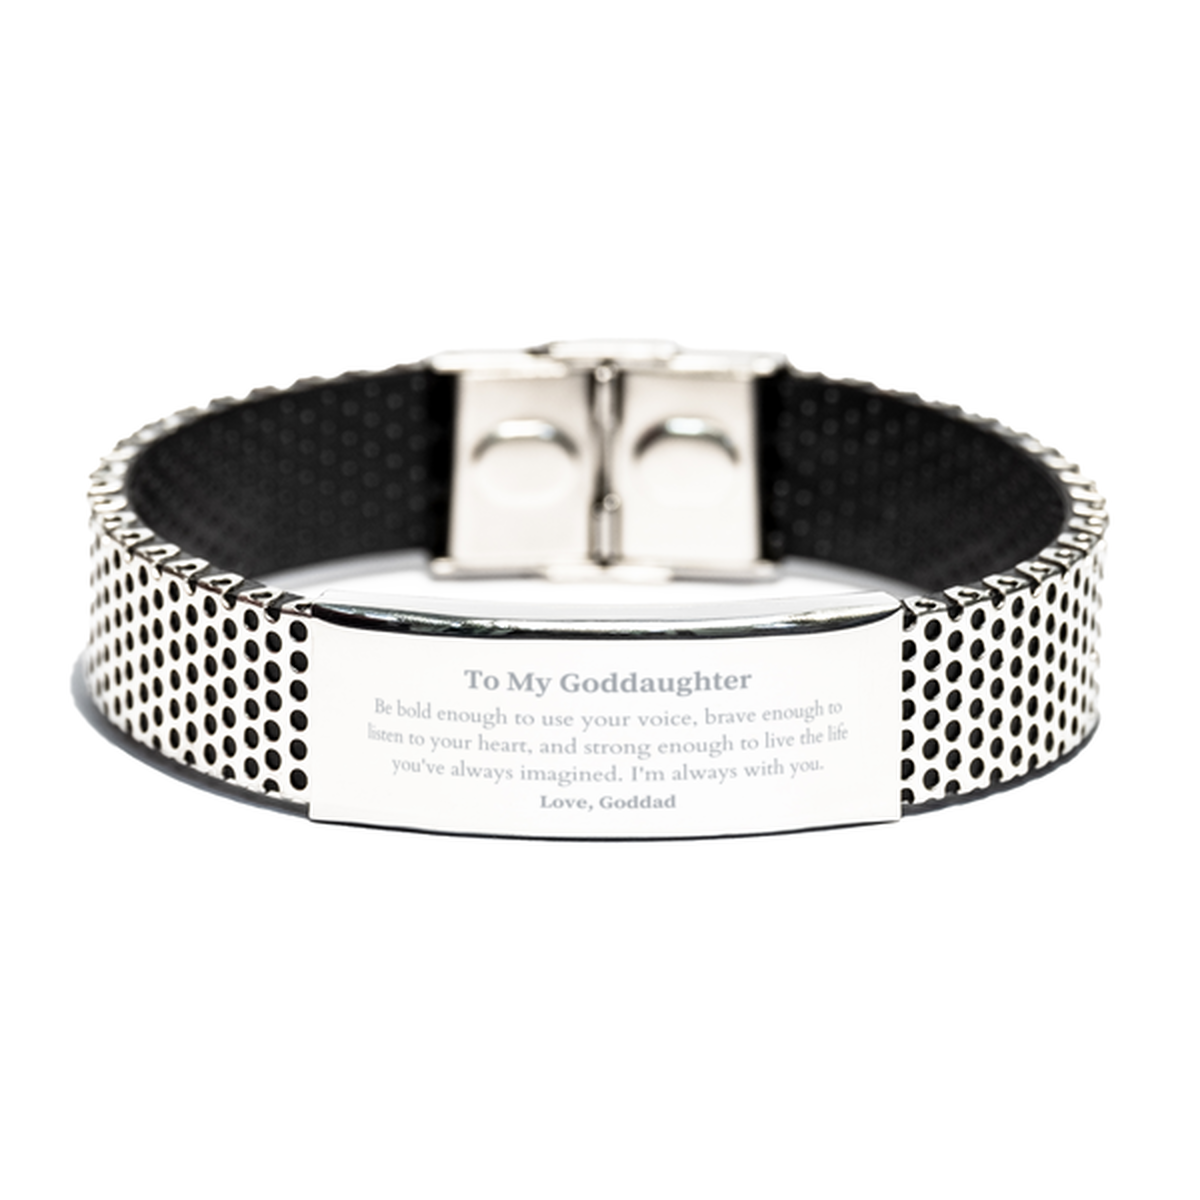 Keepsake Goddaughter Stainless Steel Bracelet Gift Idea Graduation Christmas Birthday Goddaughter from Goddad, Goddaughter Be bold enough to use your voice, brave enough to listen to your heart. Love, Goddad